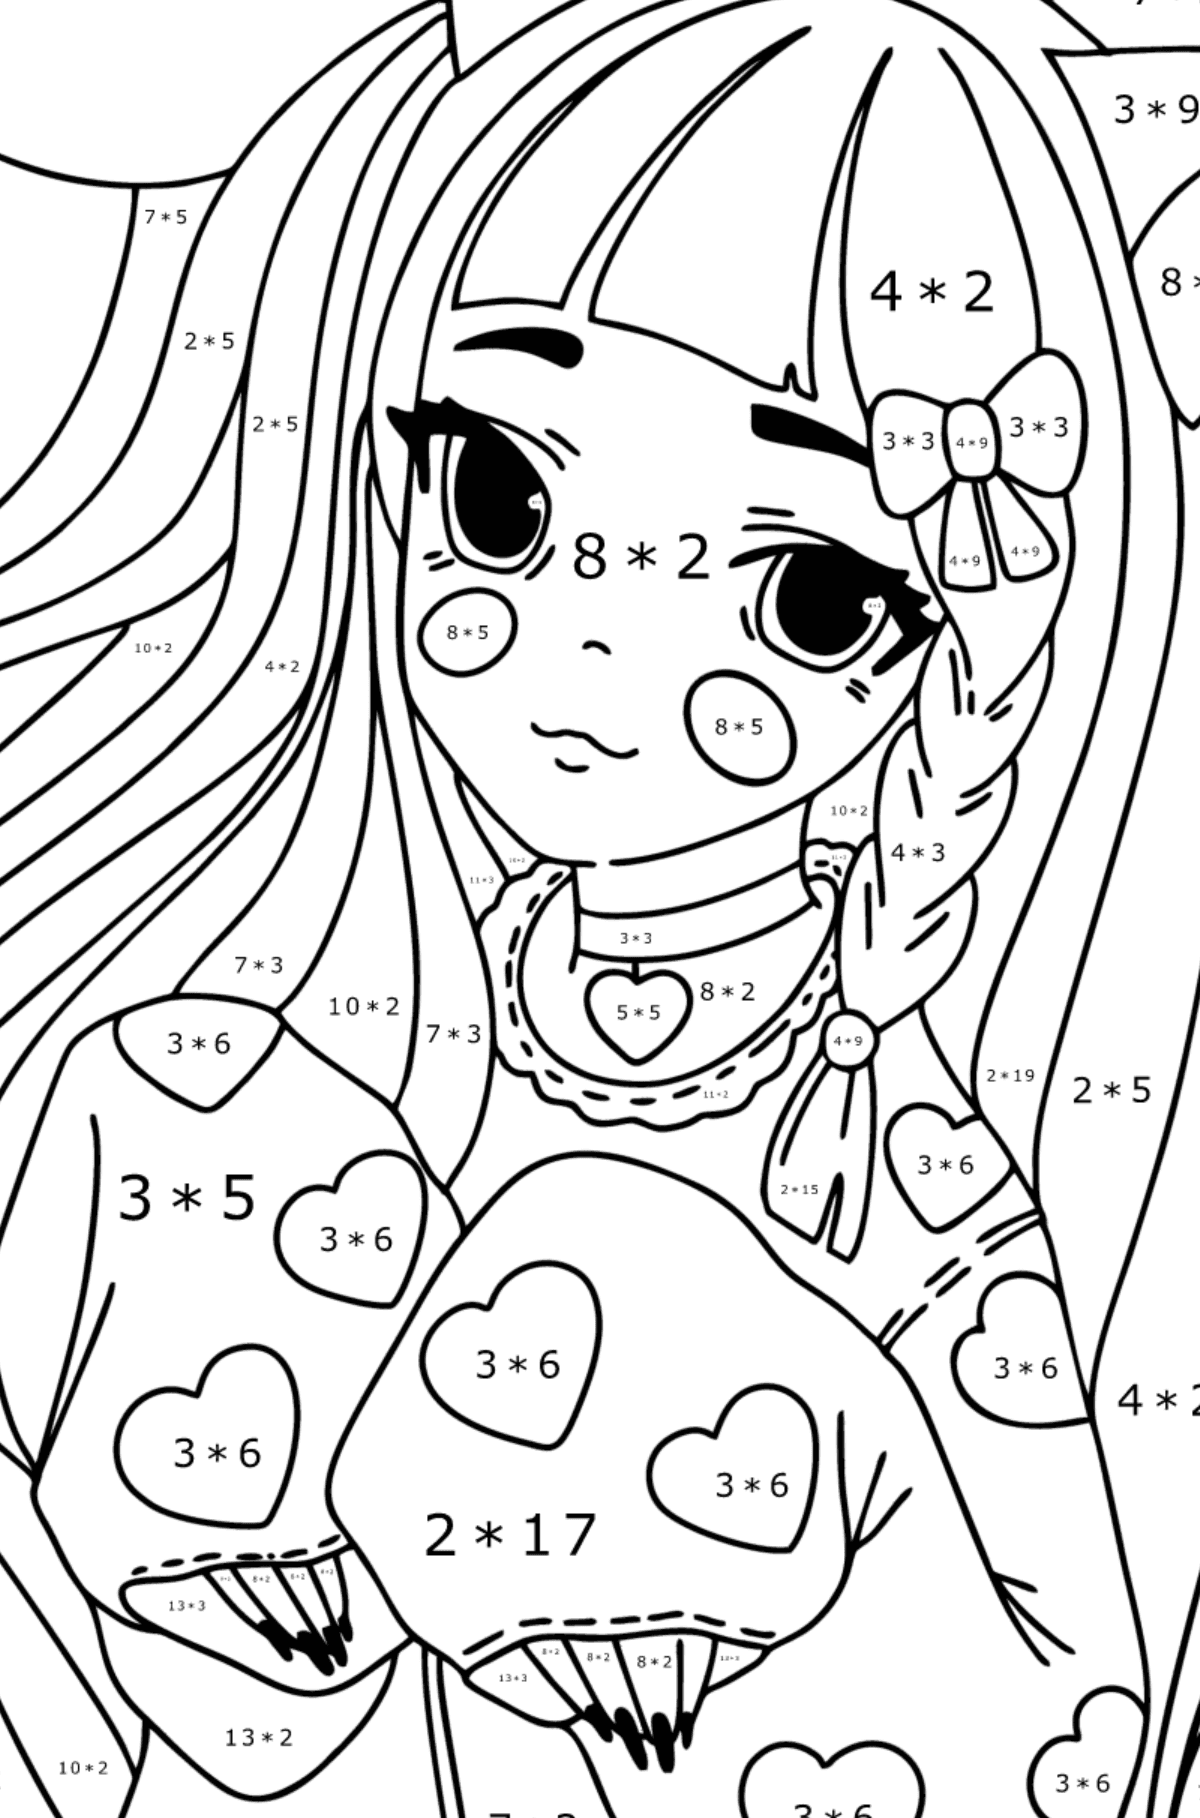 Anime girl with ears and paws coloring page - Math Coloring - Multiplication for Kids